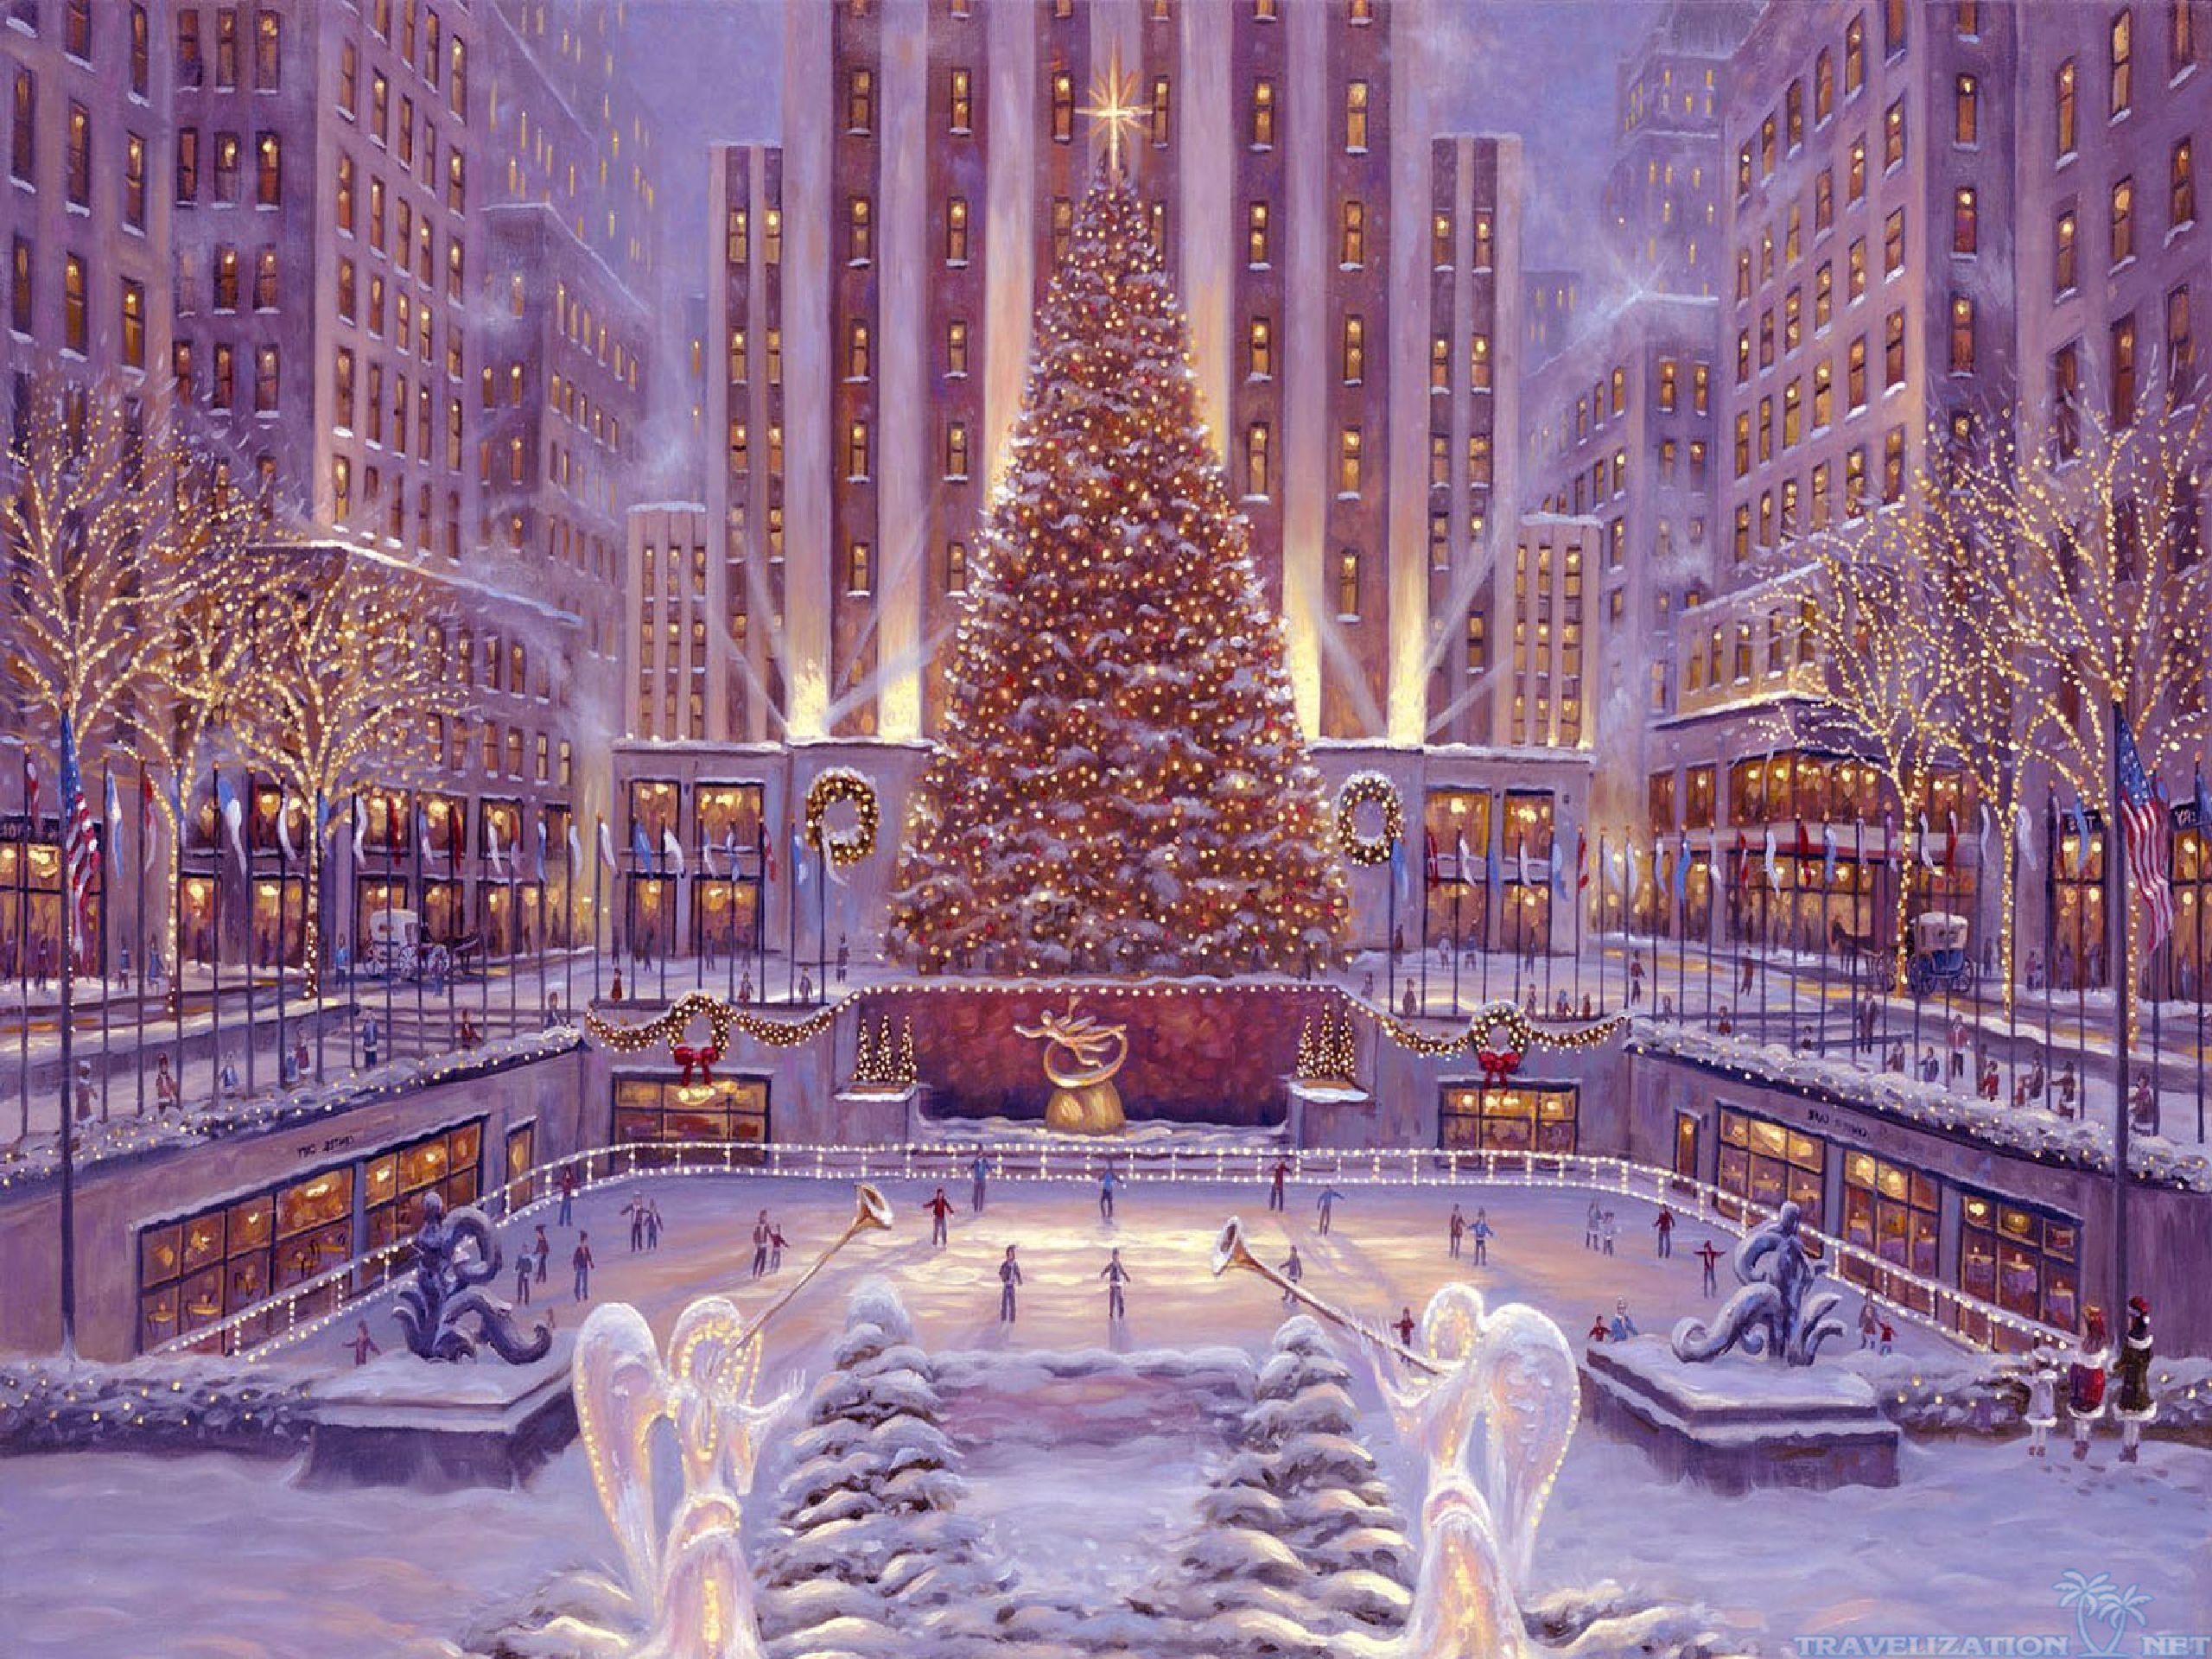 25601920. Arriving Winter Christmas Wallpapers